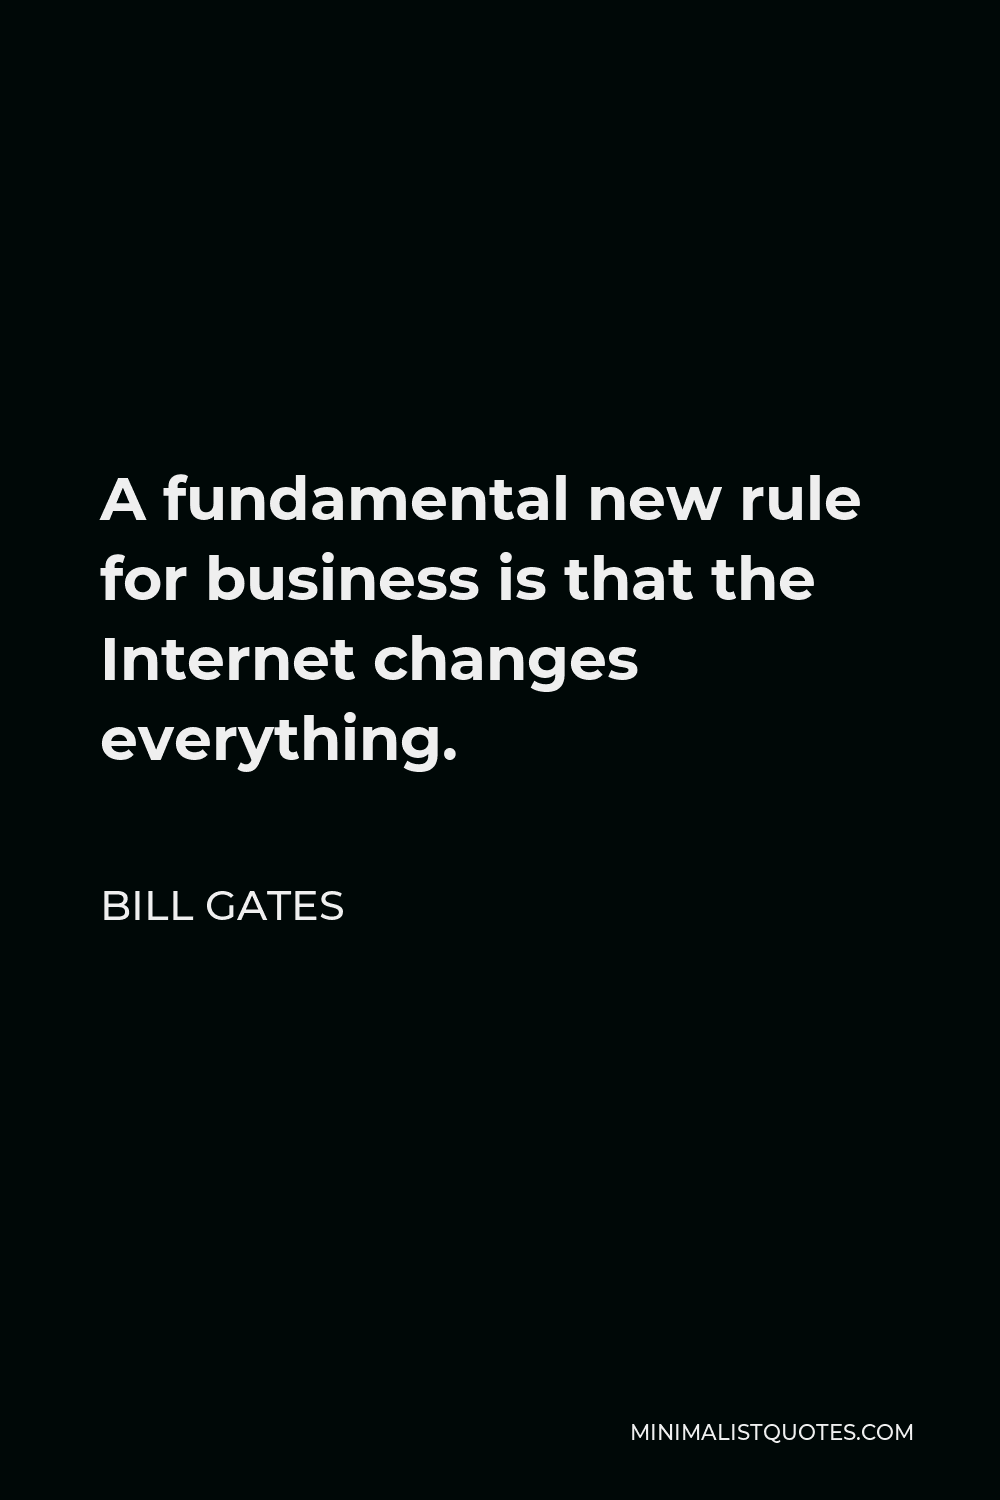 Bill Gates Quote - A fundamental new rule for business is that the Internet changes everything.